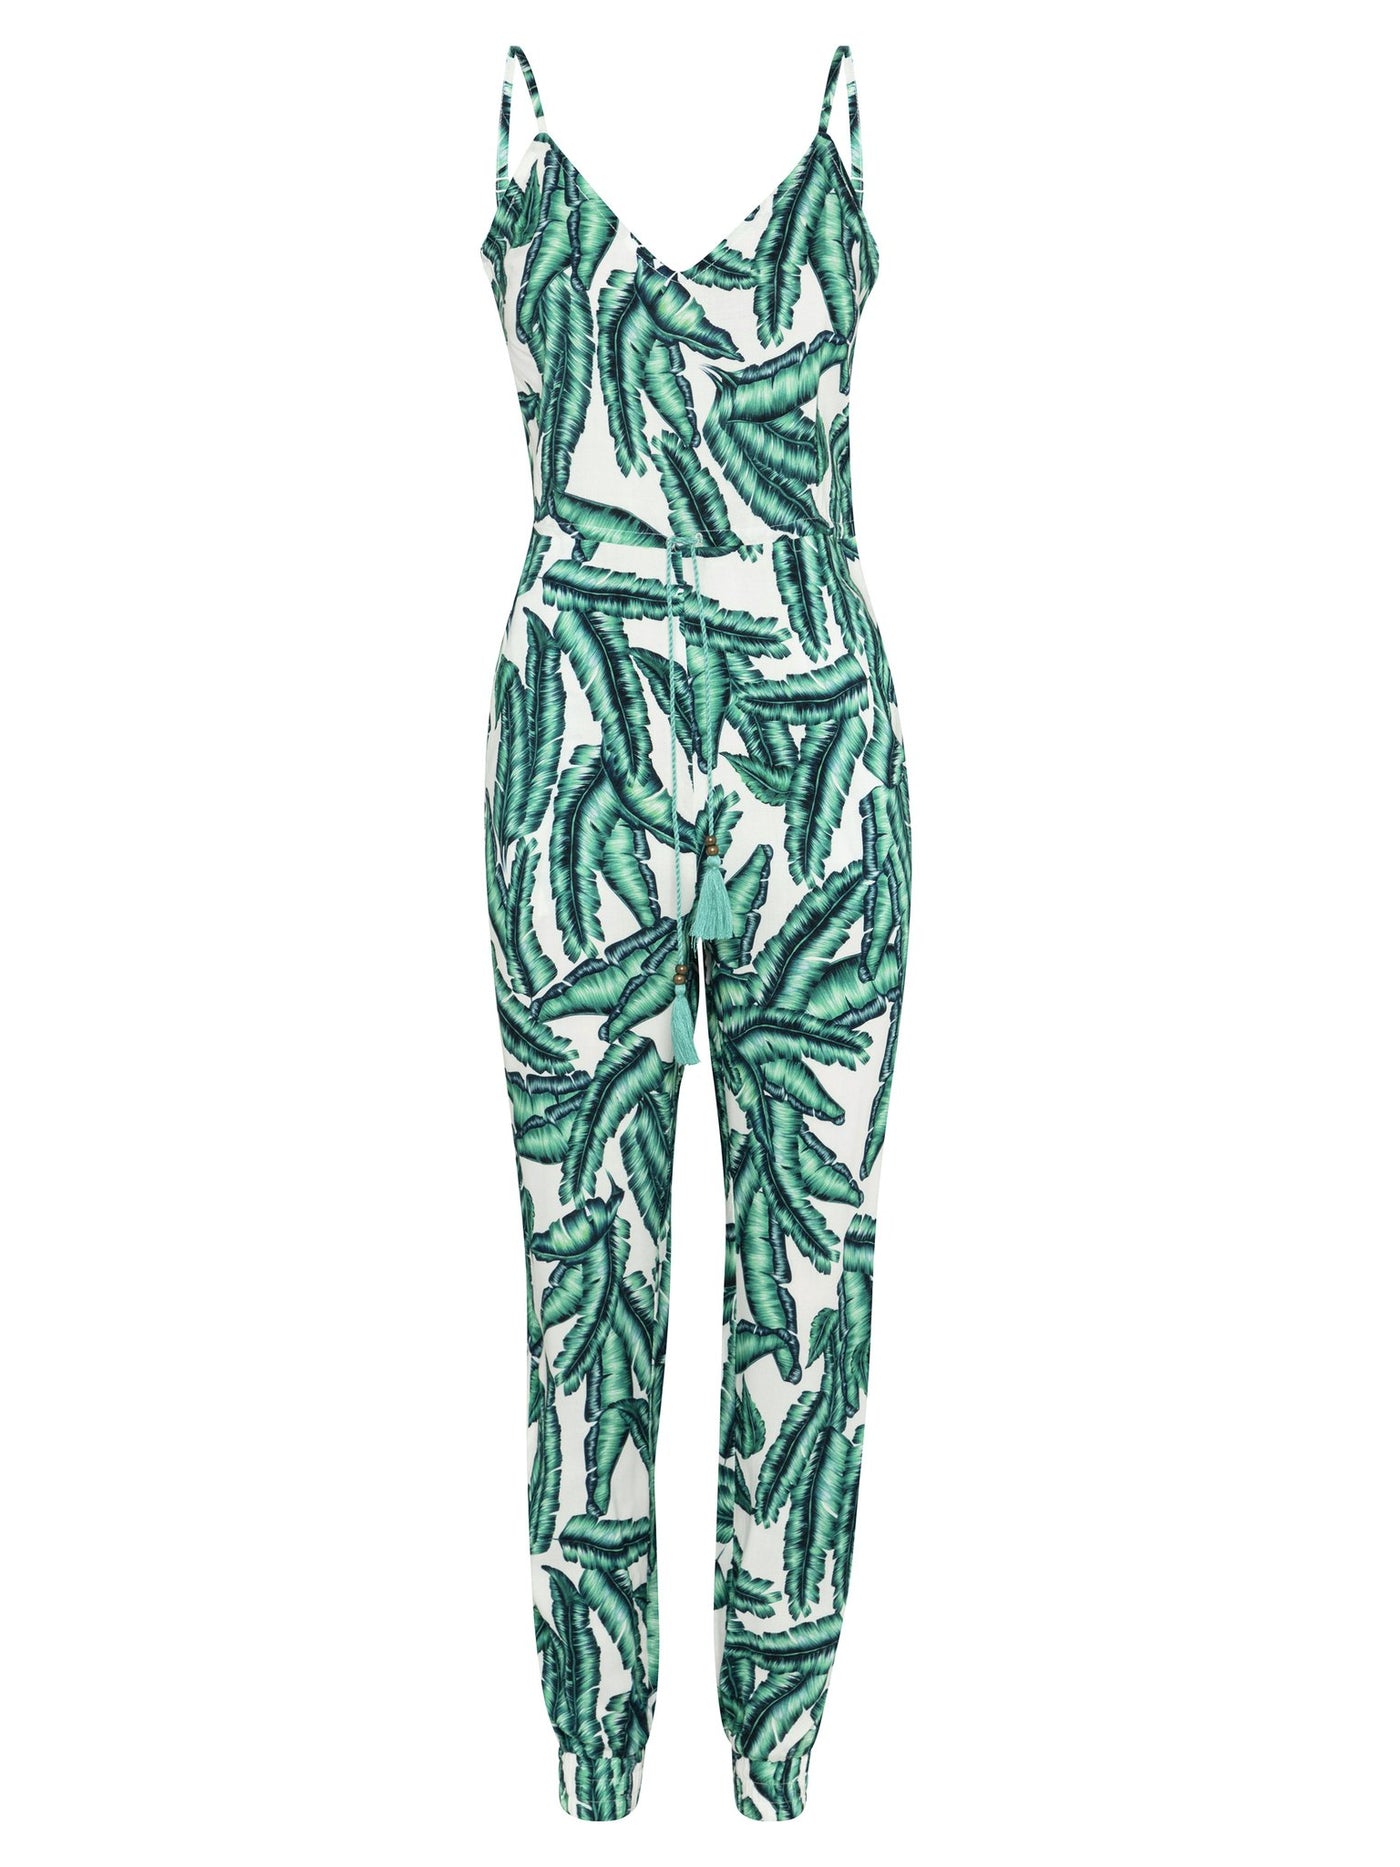 Womens boho botanical print jumpsuit green leaves white background ghost mannequin front image